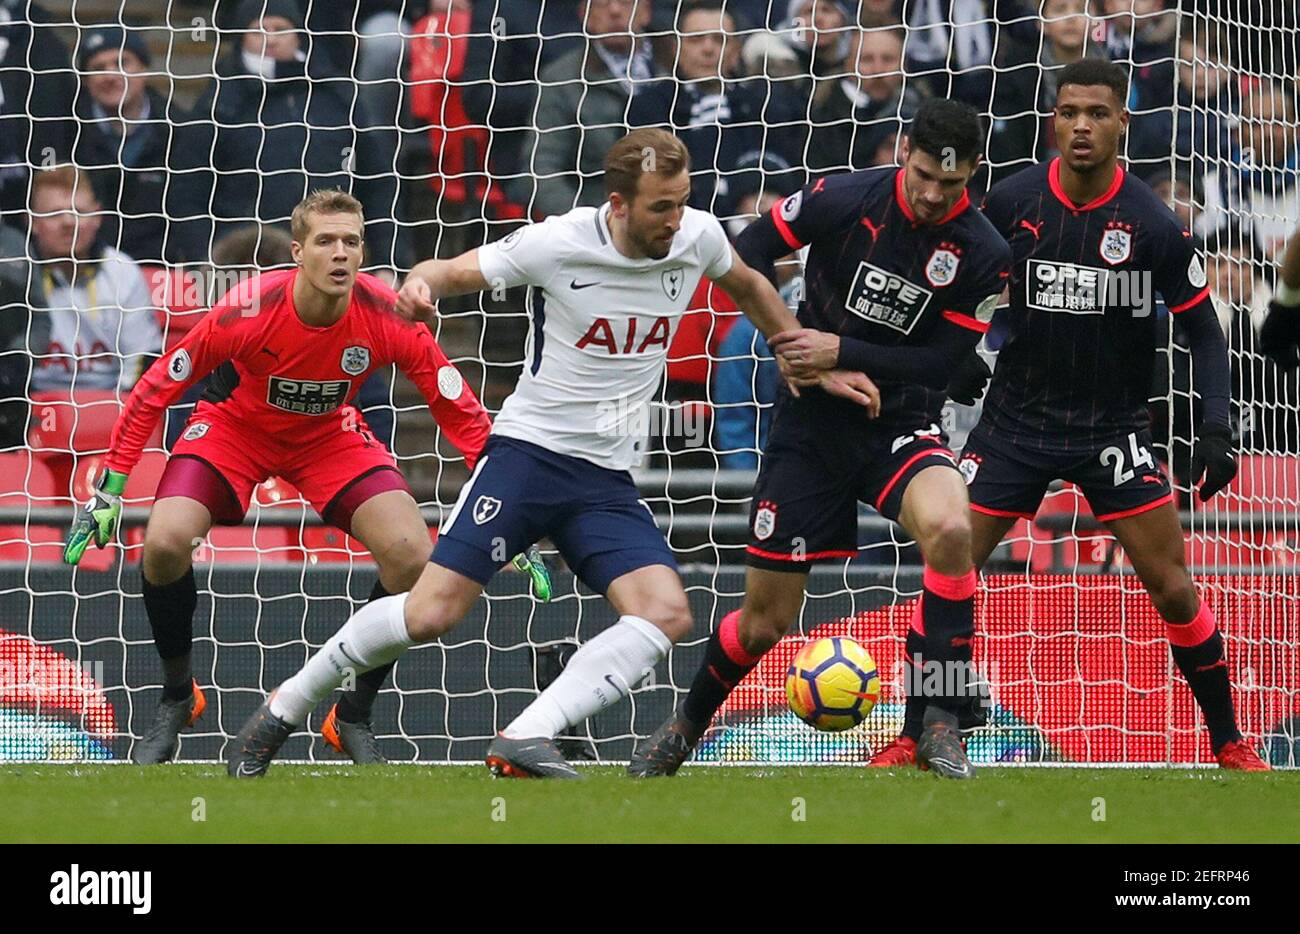 Soccer Football - Premier League - Tottenham Hotspur vs Huddersfield Town - Wembley Stadium, London, Britain - March 3, 2018   Tottenham's Harry Kane in action with Huddersfield Town’s Christopher Schindler    REUTERS/Eddie Keogh    EDITORIAL USE ONLY. No use with unauthorized audio, video, data, fixture lists, club/league logos or 'live' services. Online in-match use limited to 75 images, no video emulation. No use in betting, games or single club/league/player publications.  Please contact your account representative for further details. Stock Photo